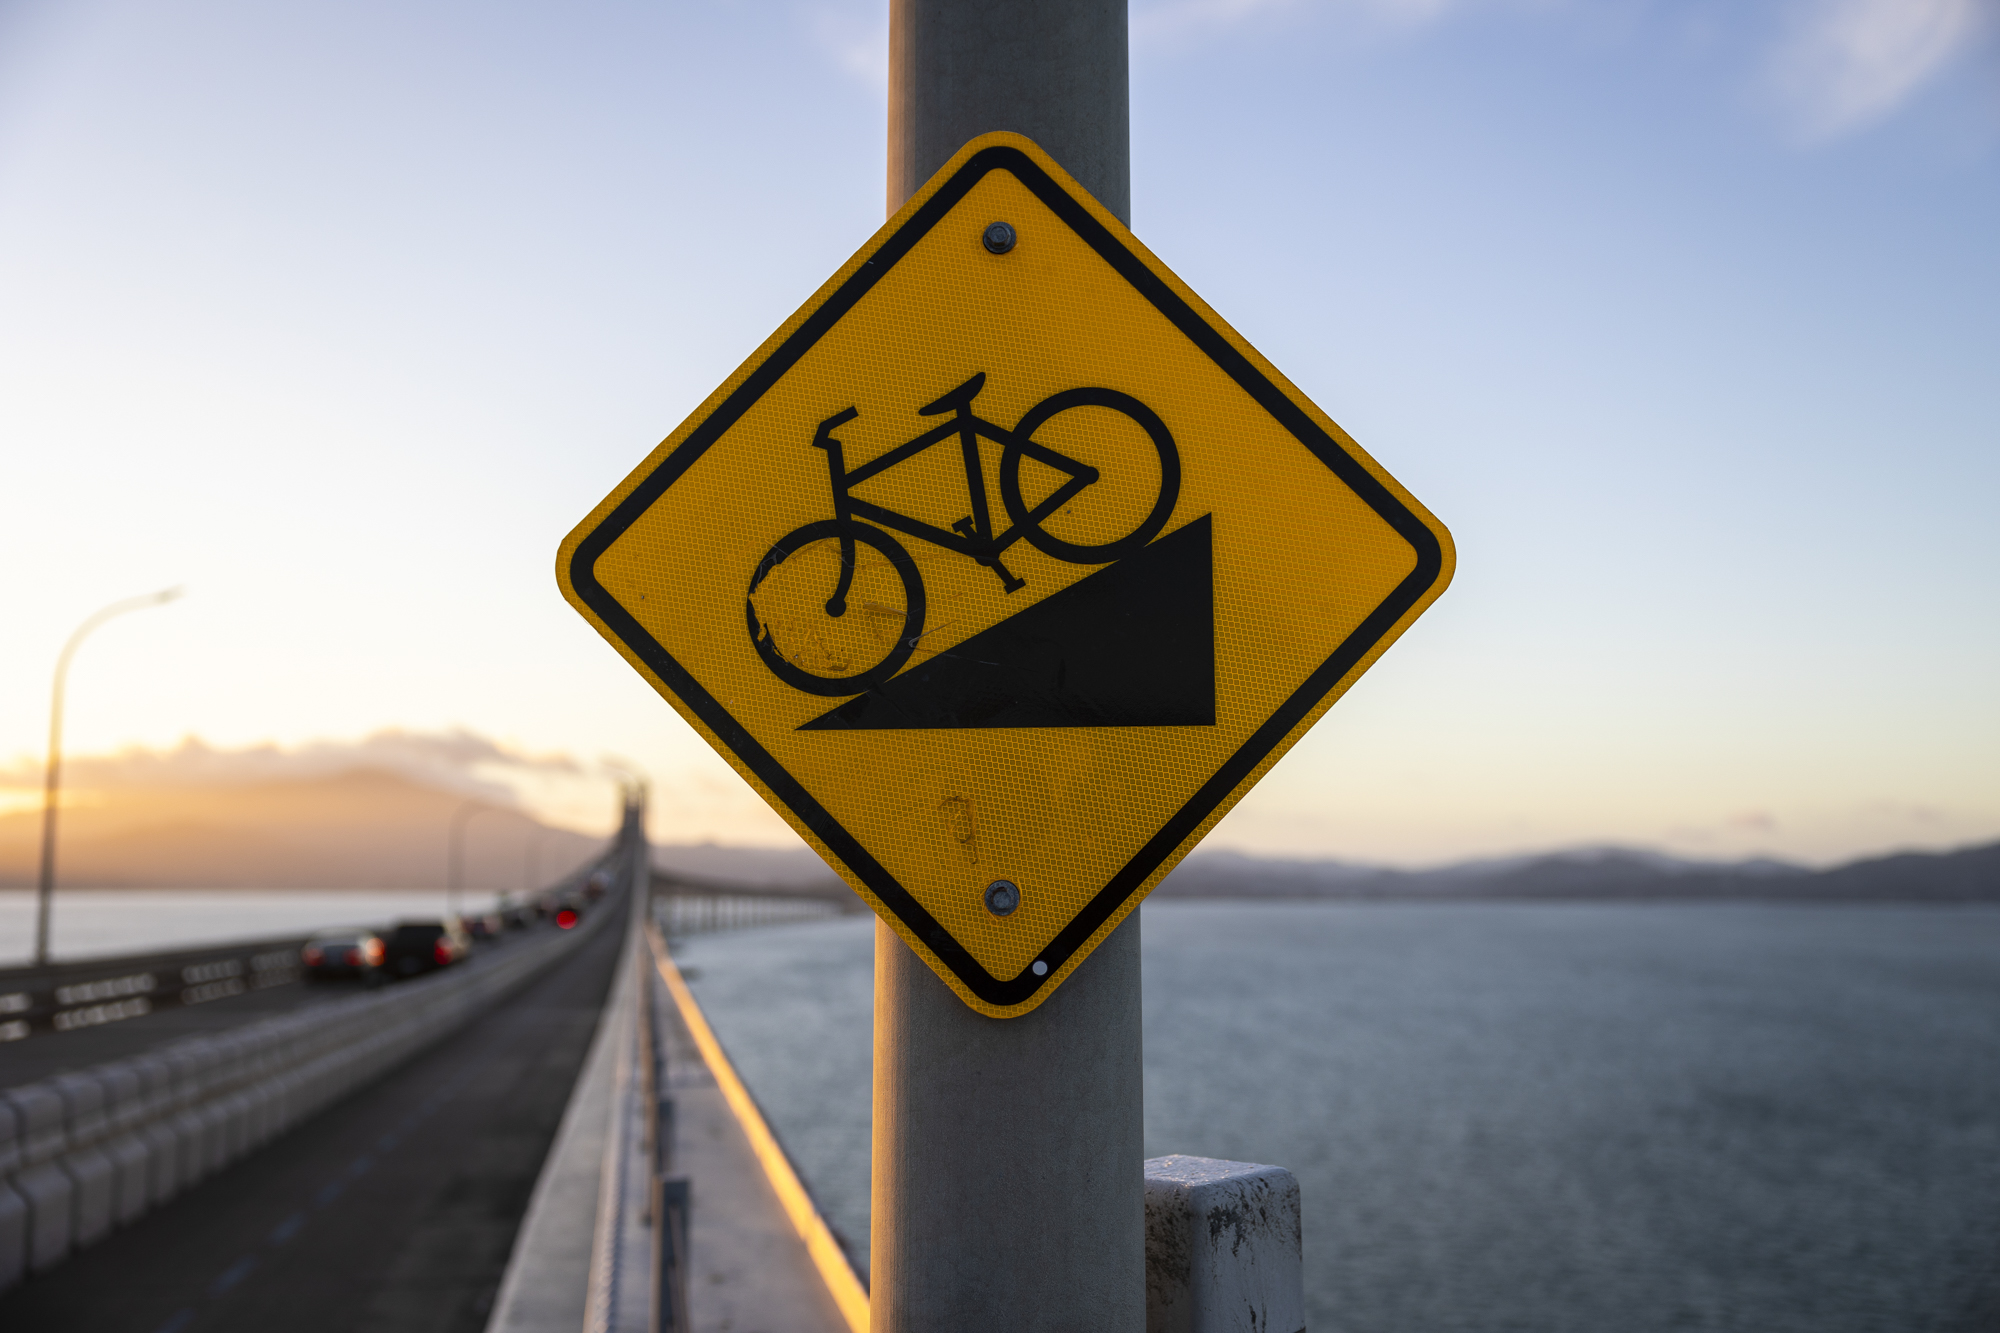 A bright yellow sign with the image of a bicycle on it.